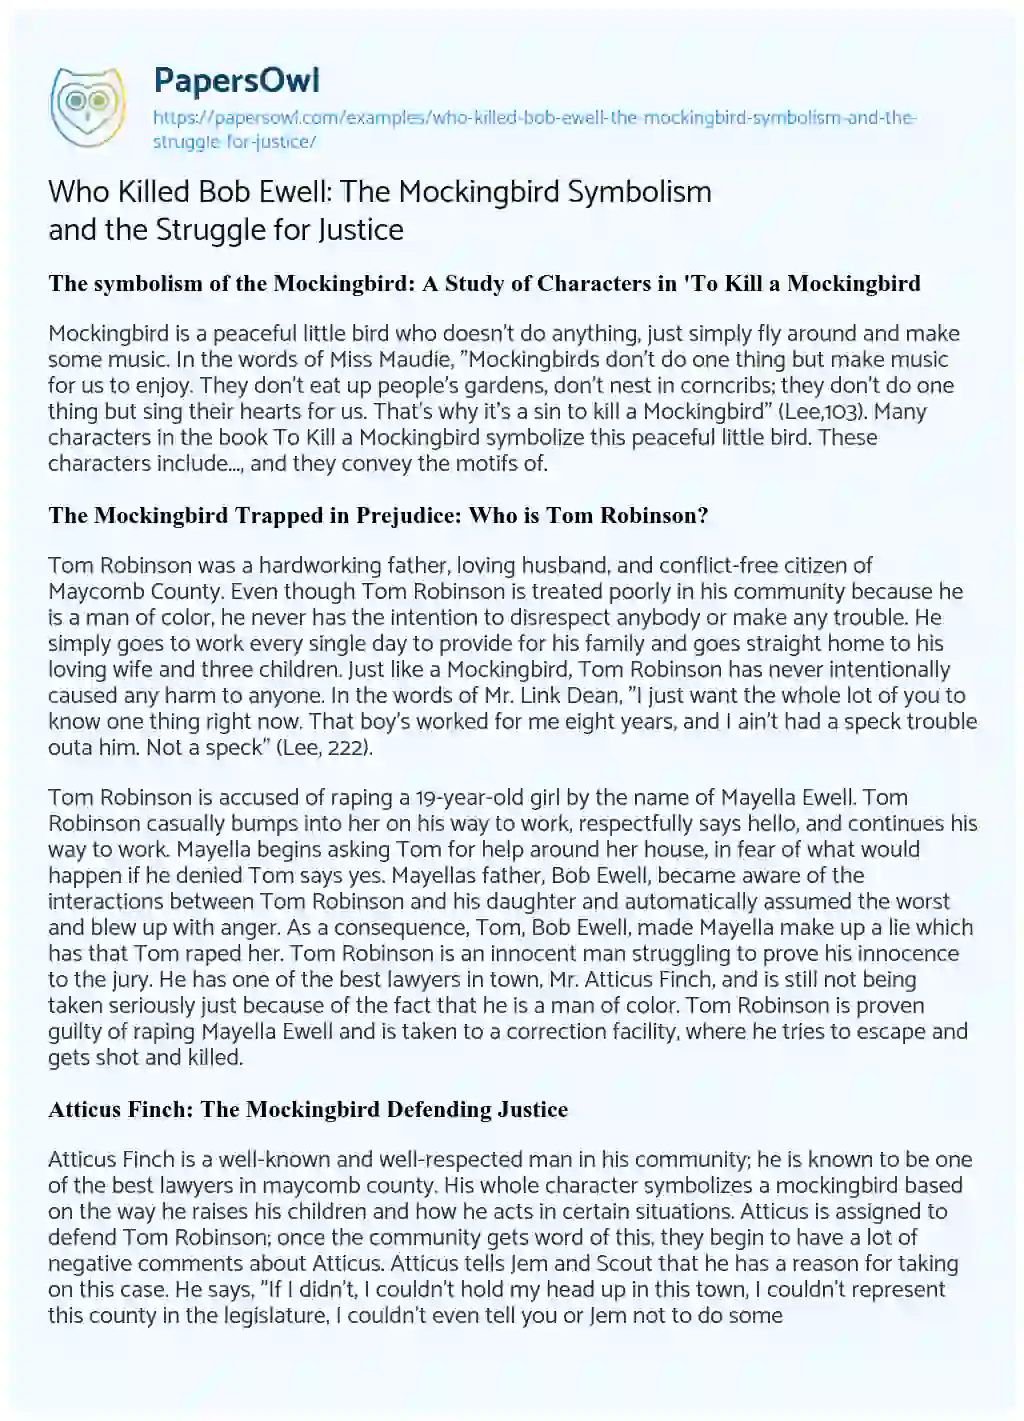 Essay on Who Killed Bob Ewell: the Mockingbird Symbolism and the Struggle for Justice